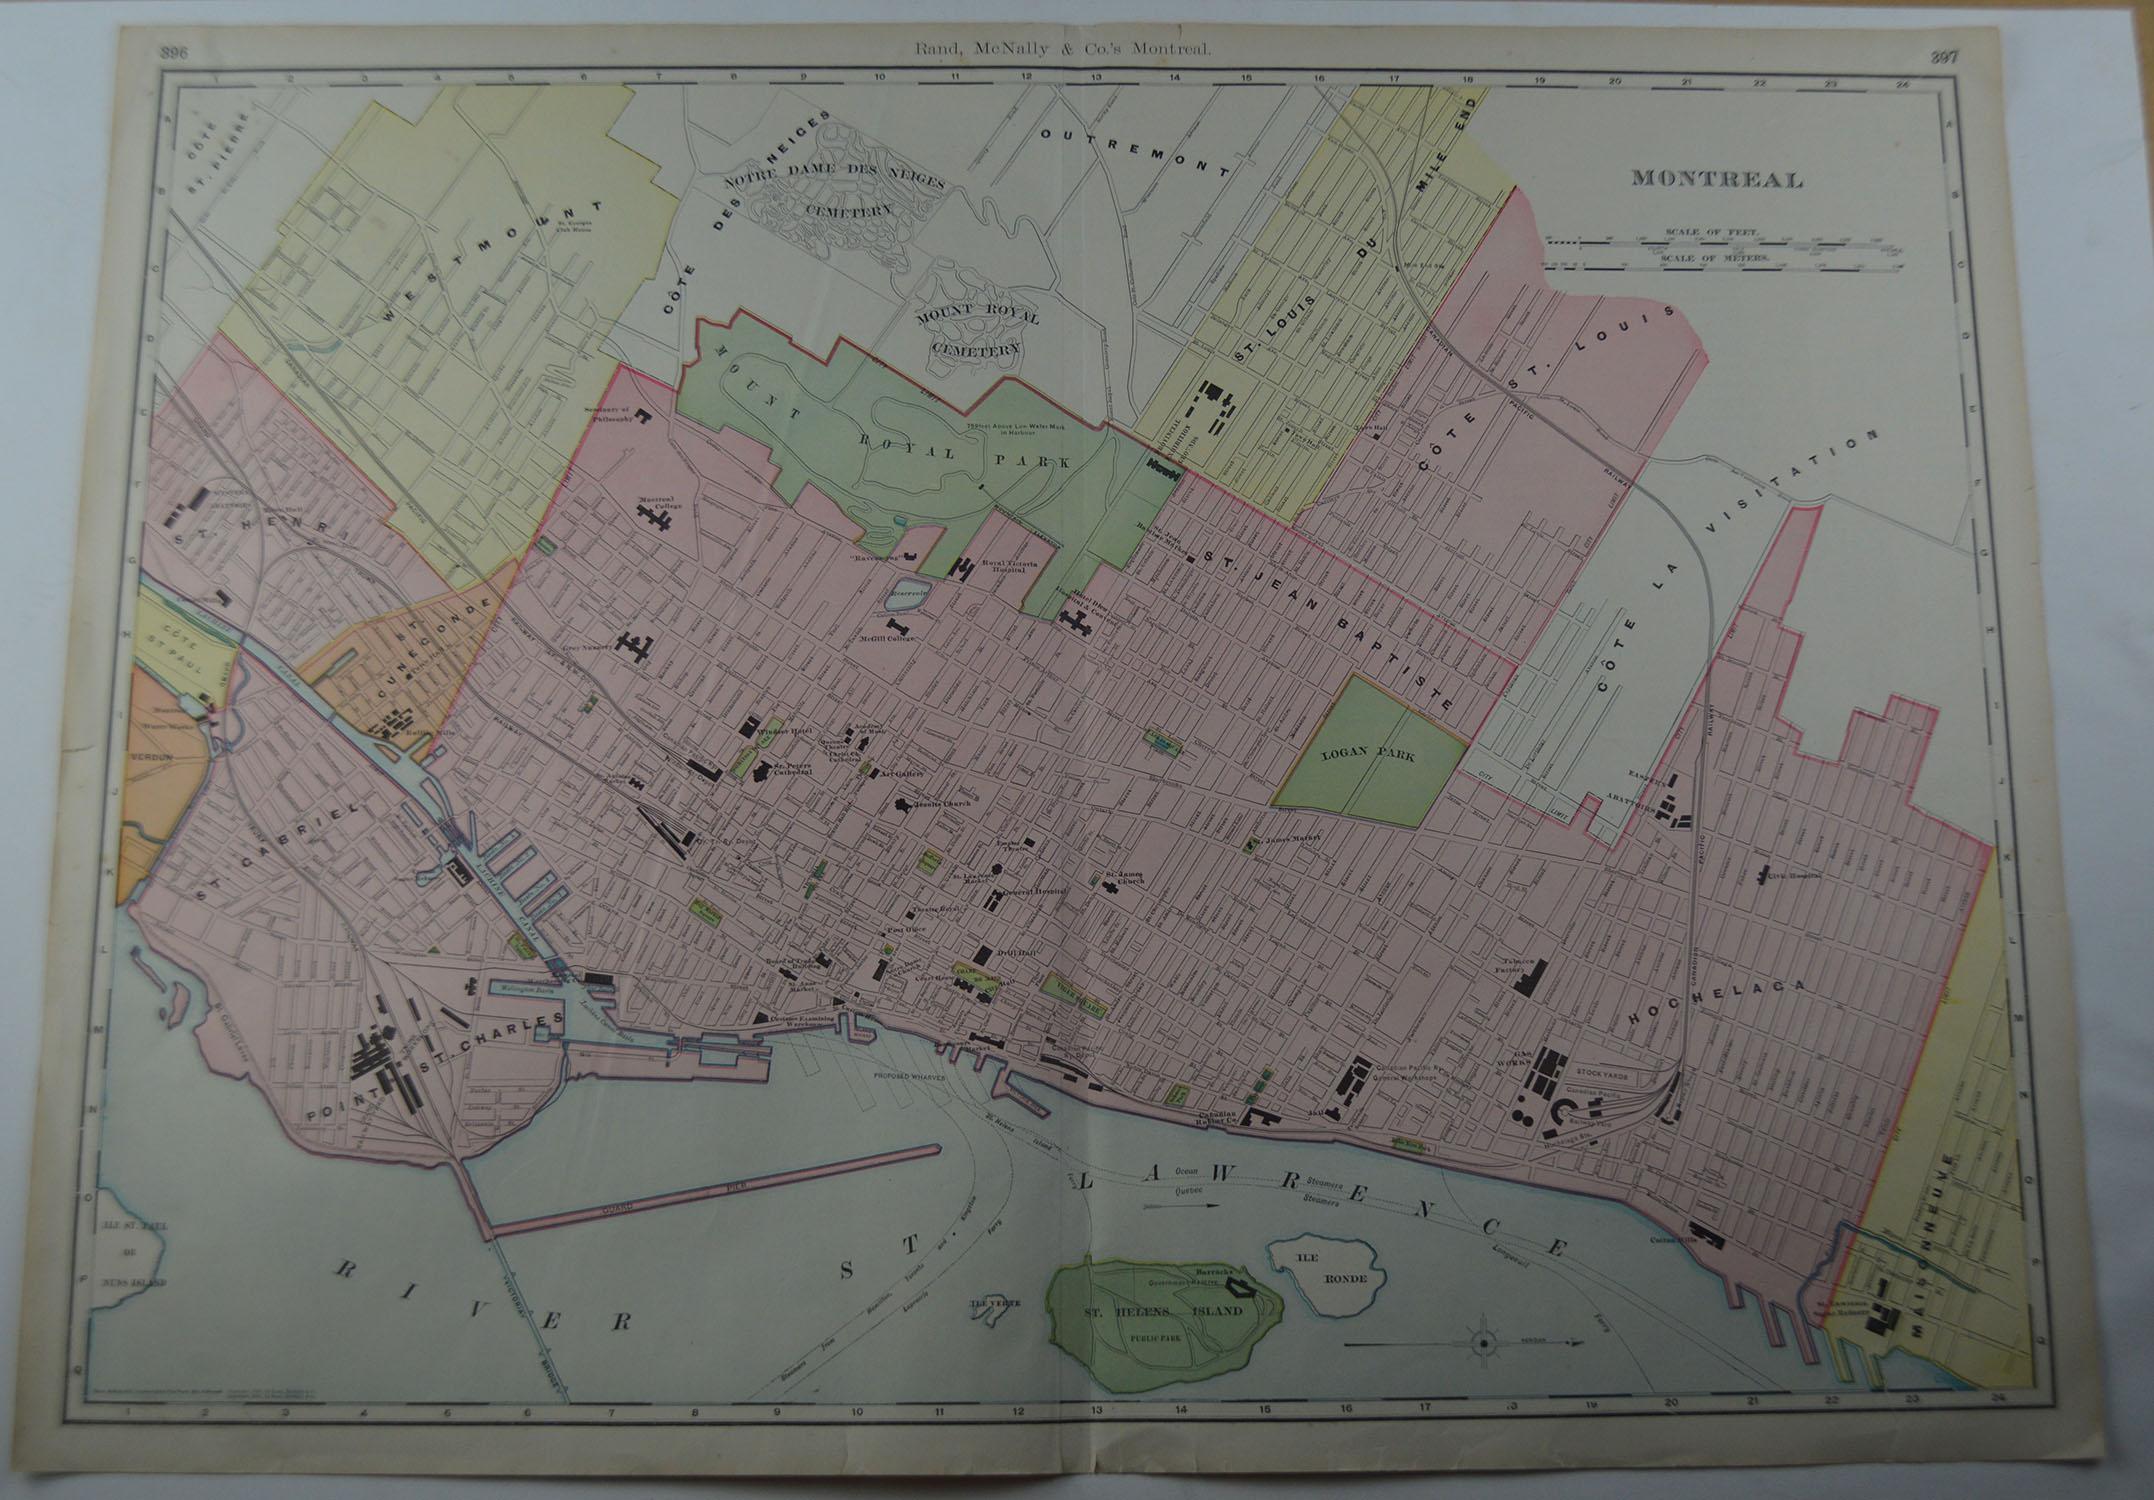 Fabulous colorful map of Montreal

Original color

By Rand, McNally & Co.

Published circa 1900

Unframed

Free shipping.